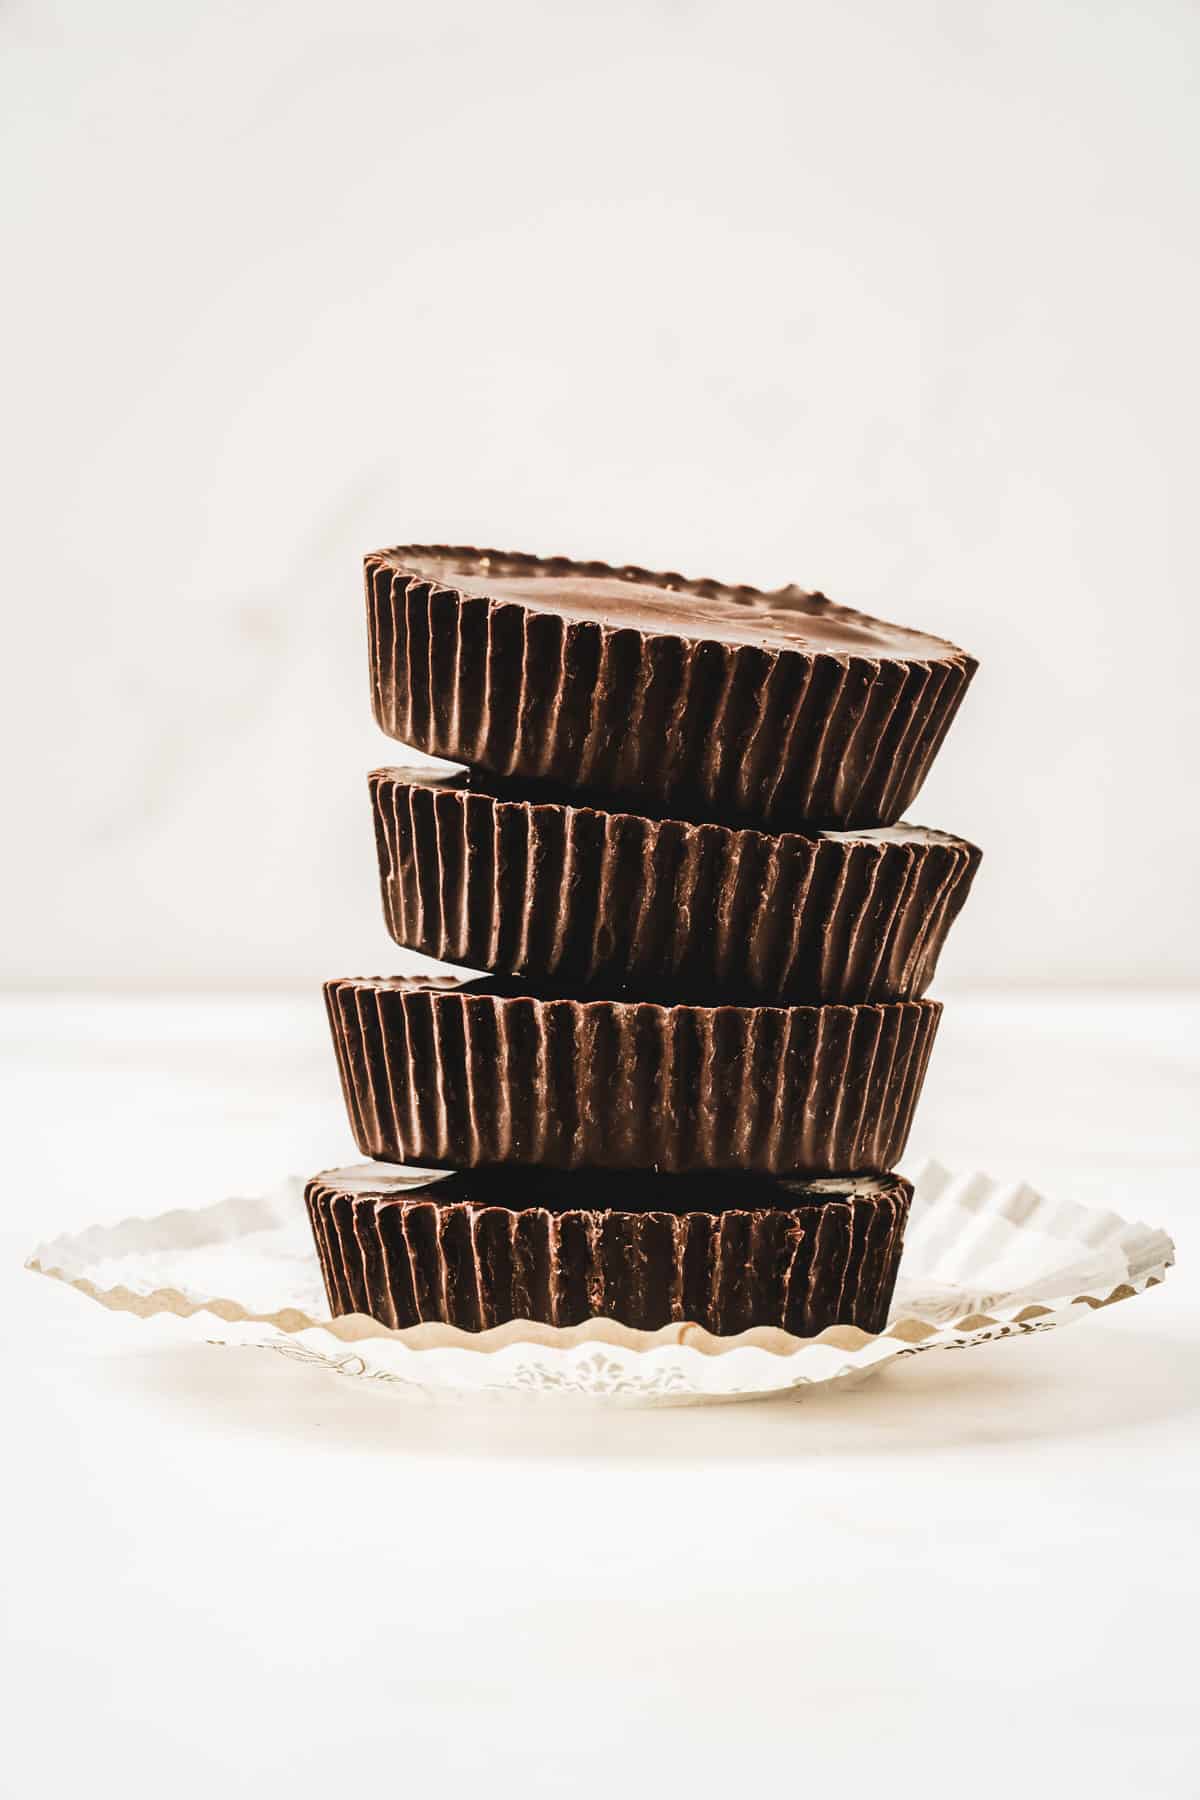 Stack of peanut butter cups